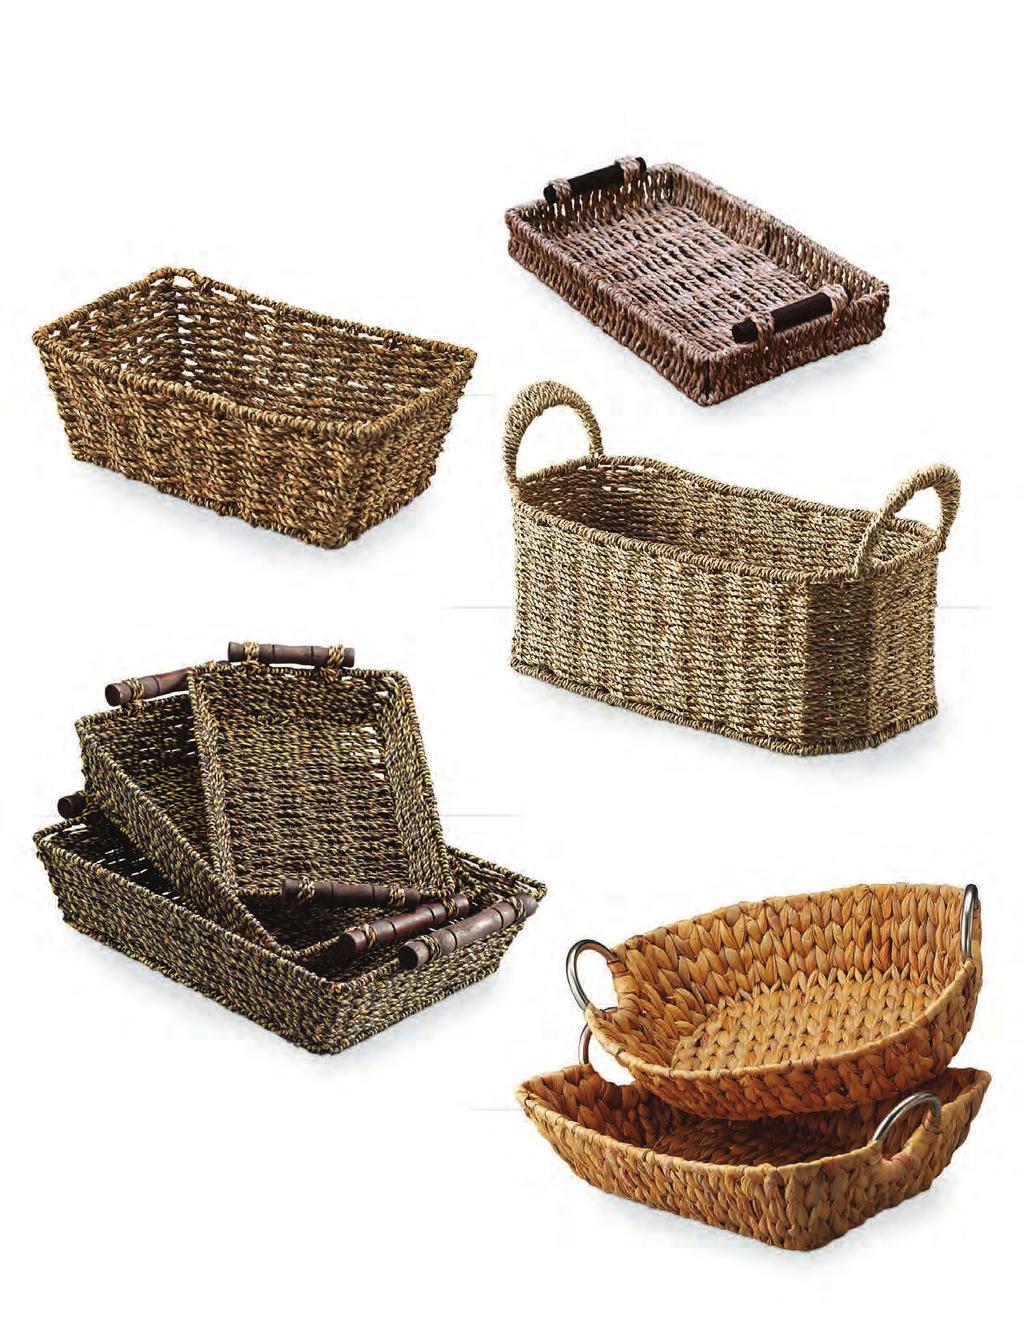 Baskets Without Plastic Liners 85064 Rectangular Seagrass Tray with Metal Frame and Wooden Ear Handles 8.875 x 5.75 x 1.25 4/$2.49 ea. 20116 Rectangular Seagrass Tray with Metal Frame 10.25 x 6.